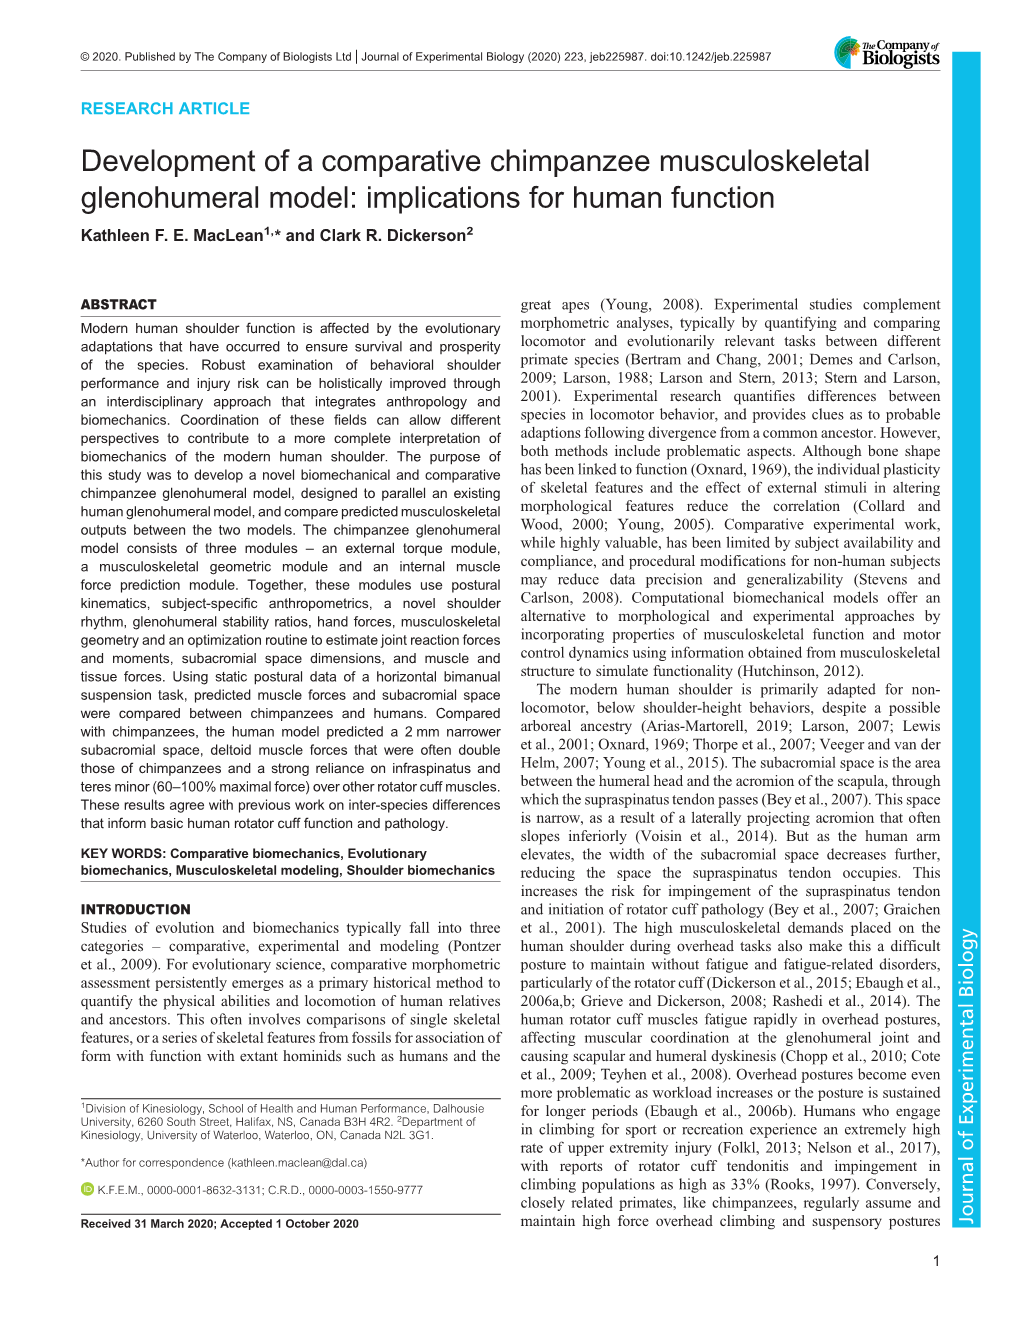 Development of a Comparative Chimpanzee Musculoskeletal Glenohumeral Model: Implications for Human Function Kathleen F